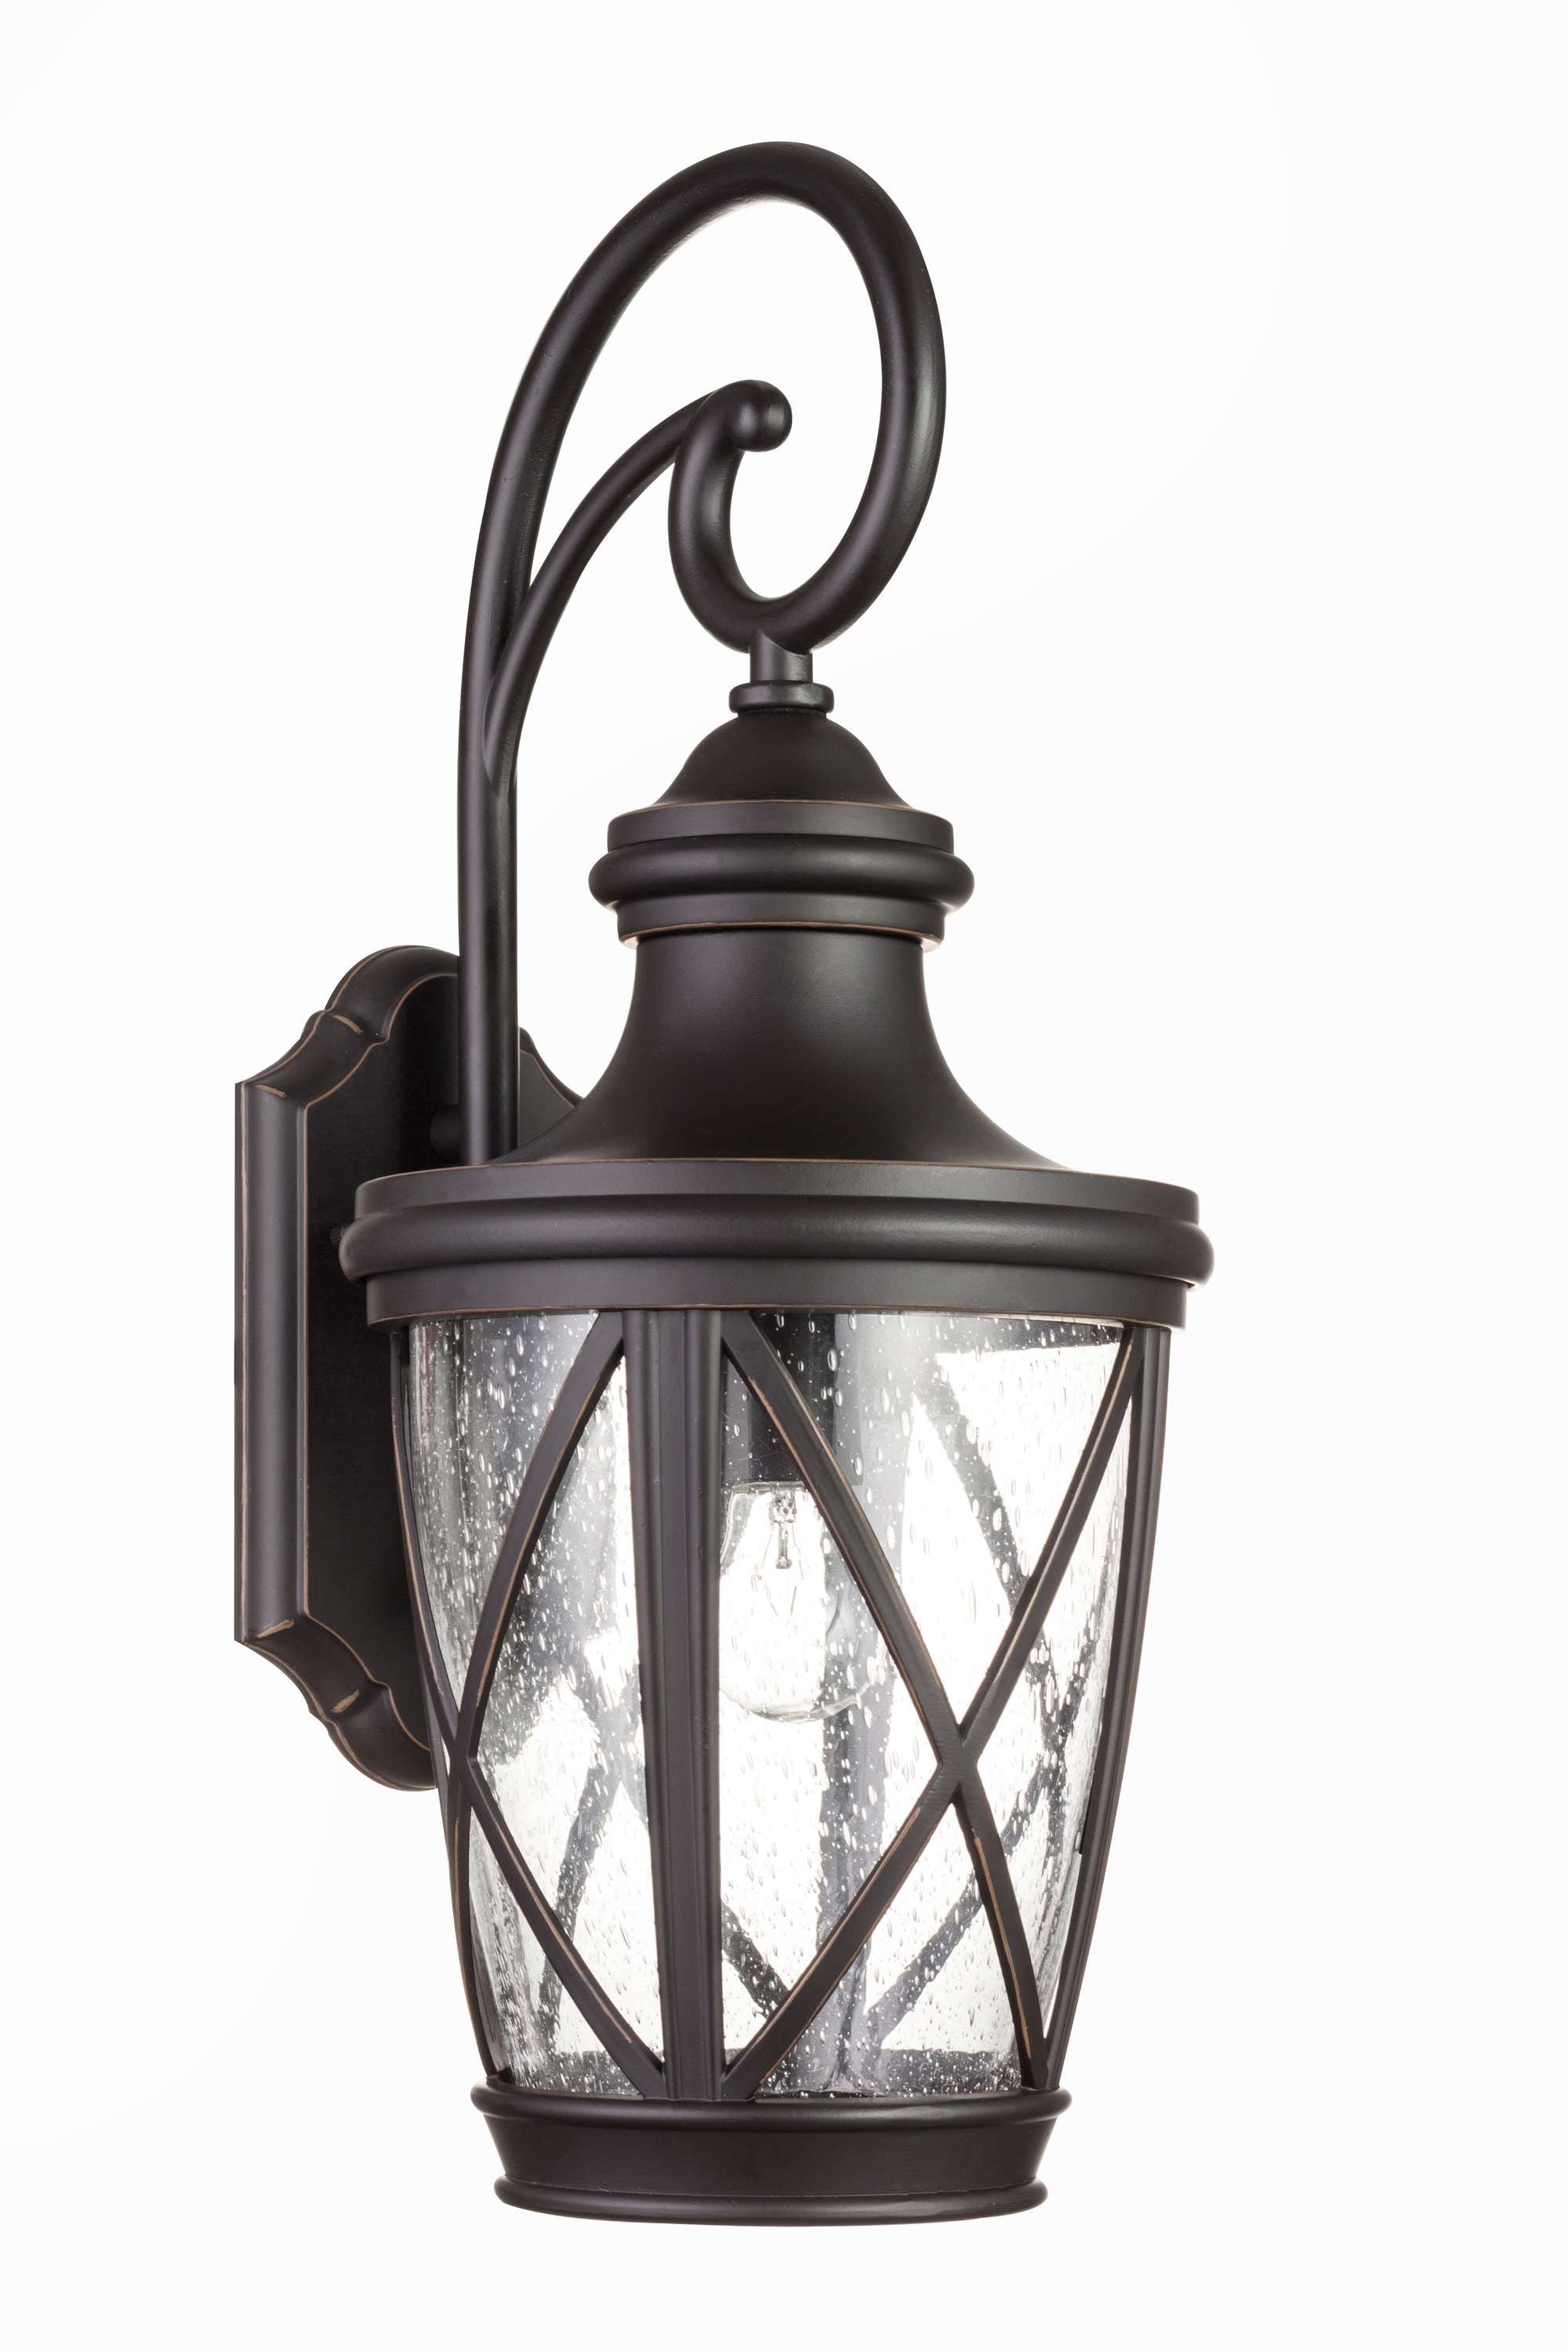 Allen & Roth Lindbergh Wall Lantern Specialty Bronze Finish 0361365 for sale online 